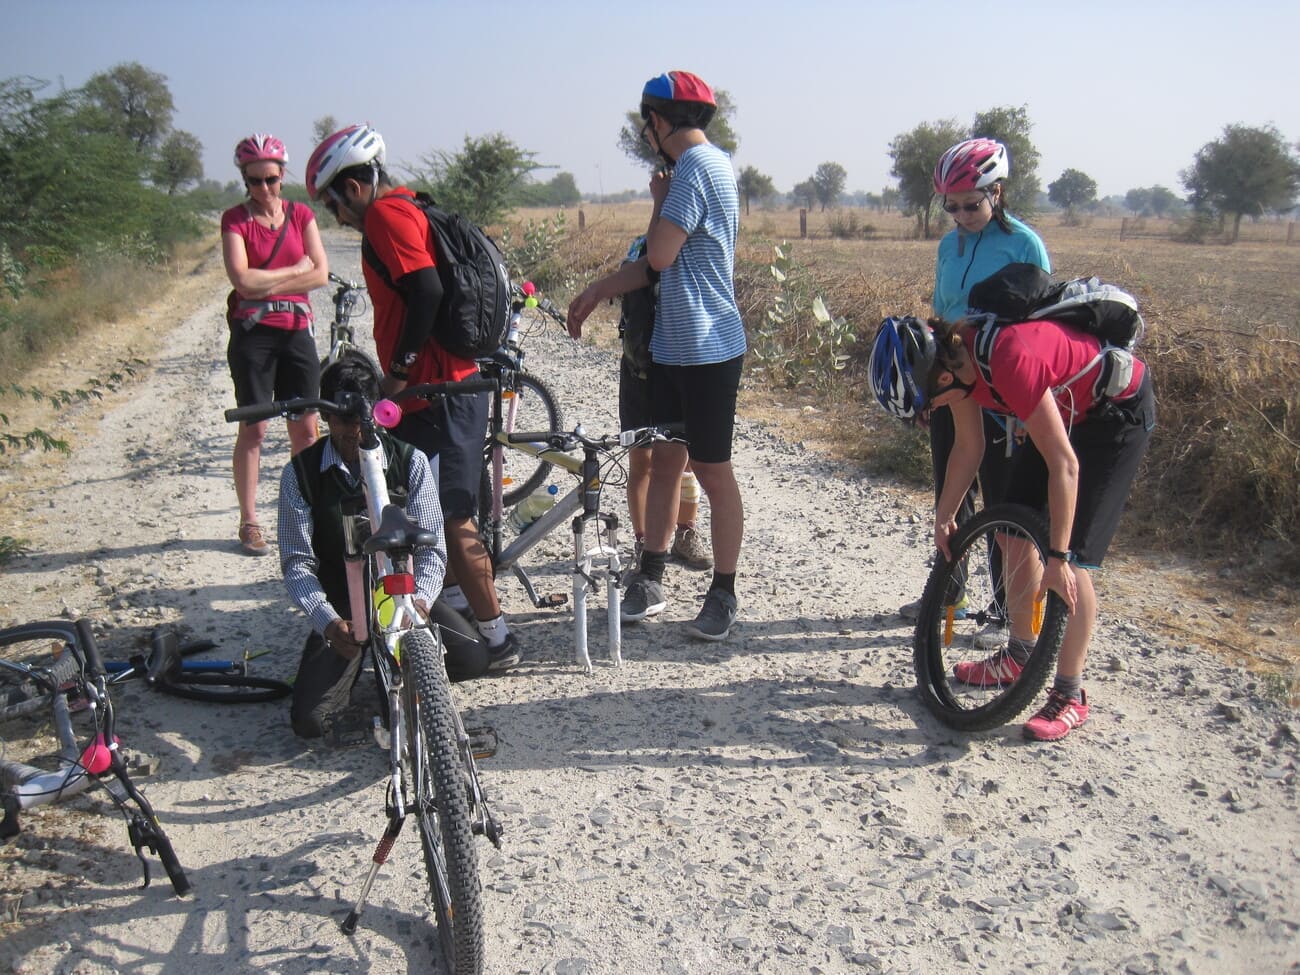 A short stop to check the air pressure of the bicycle tires